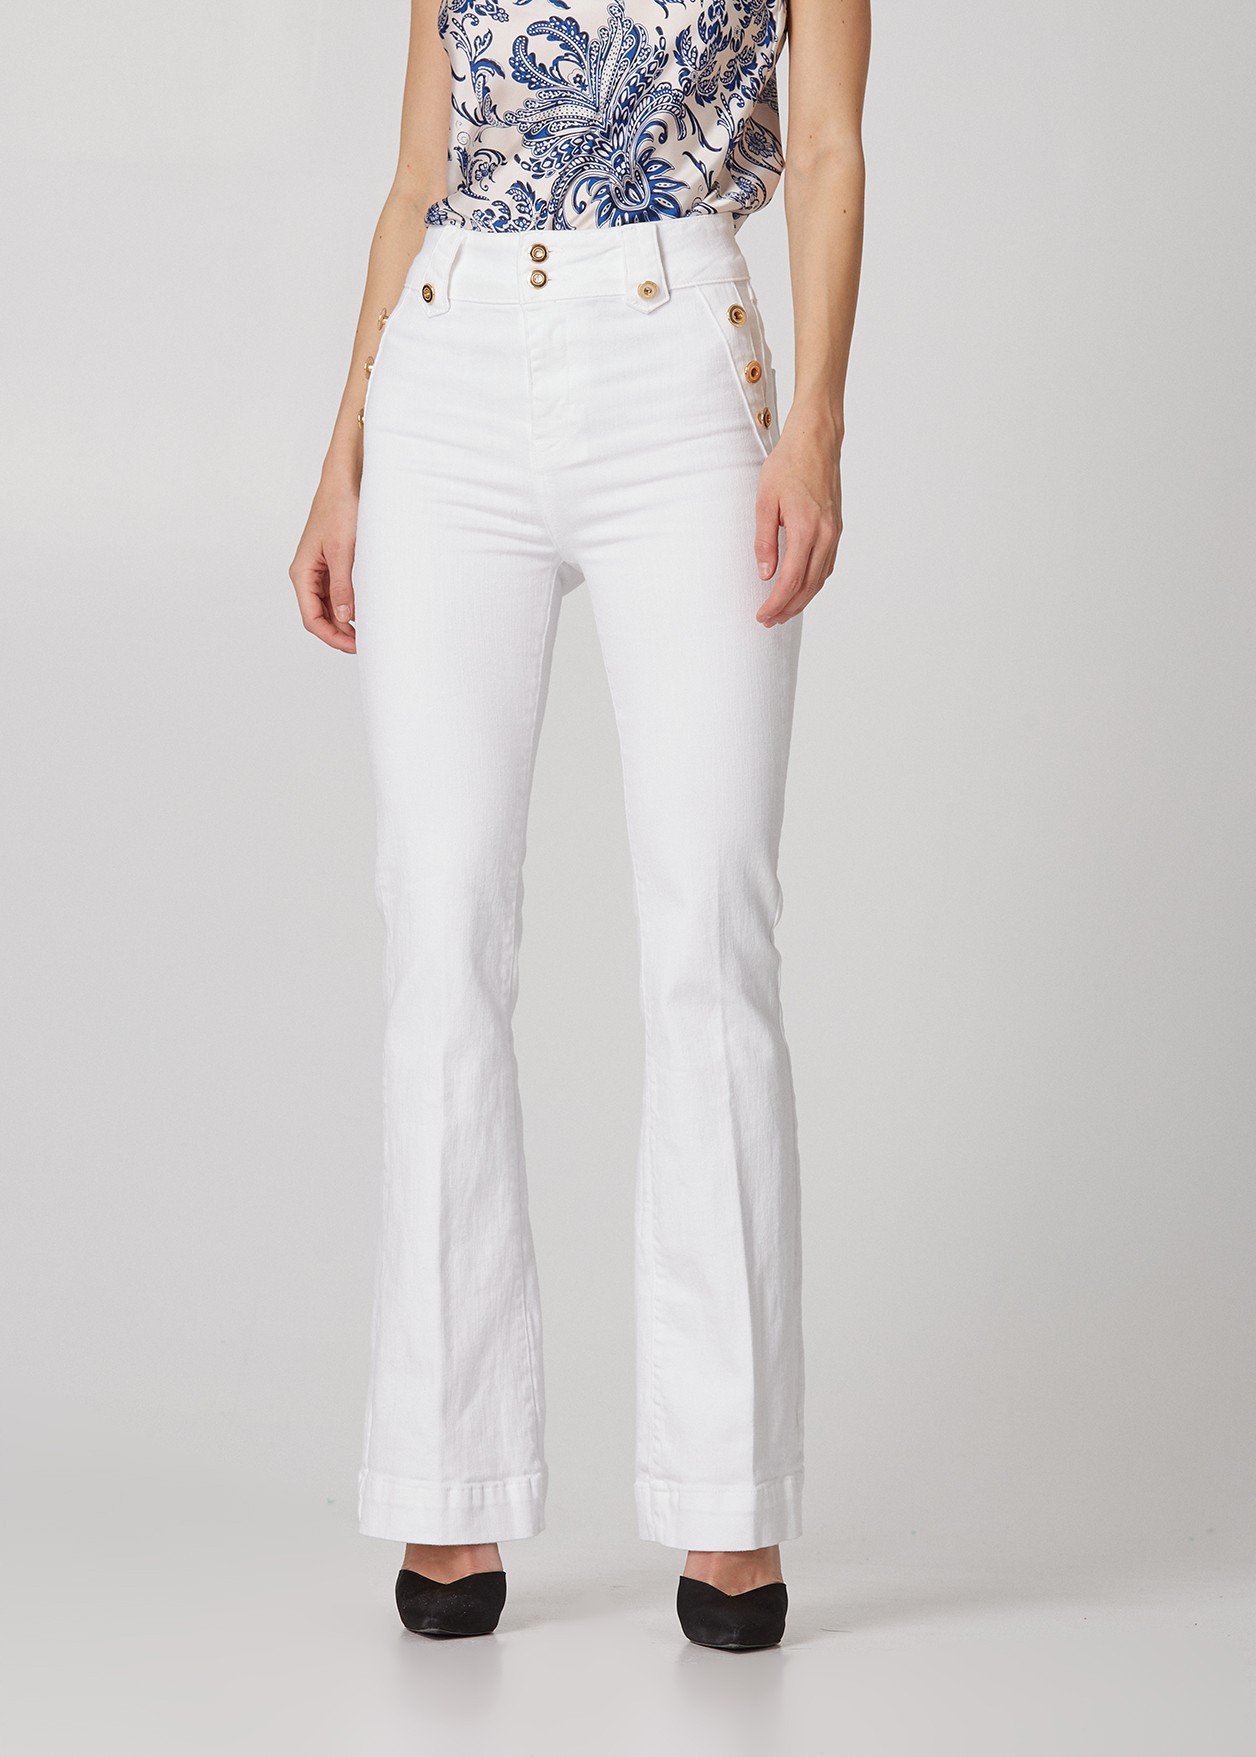 Denim flared trousers with decorative buttons